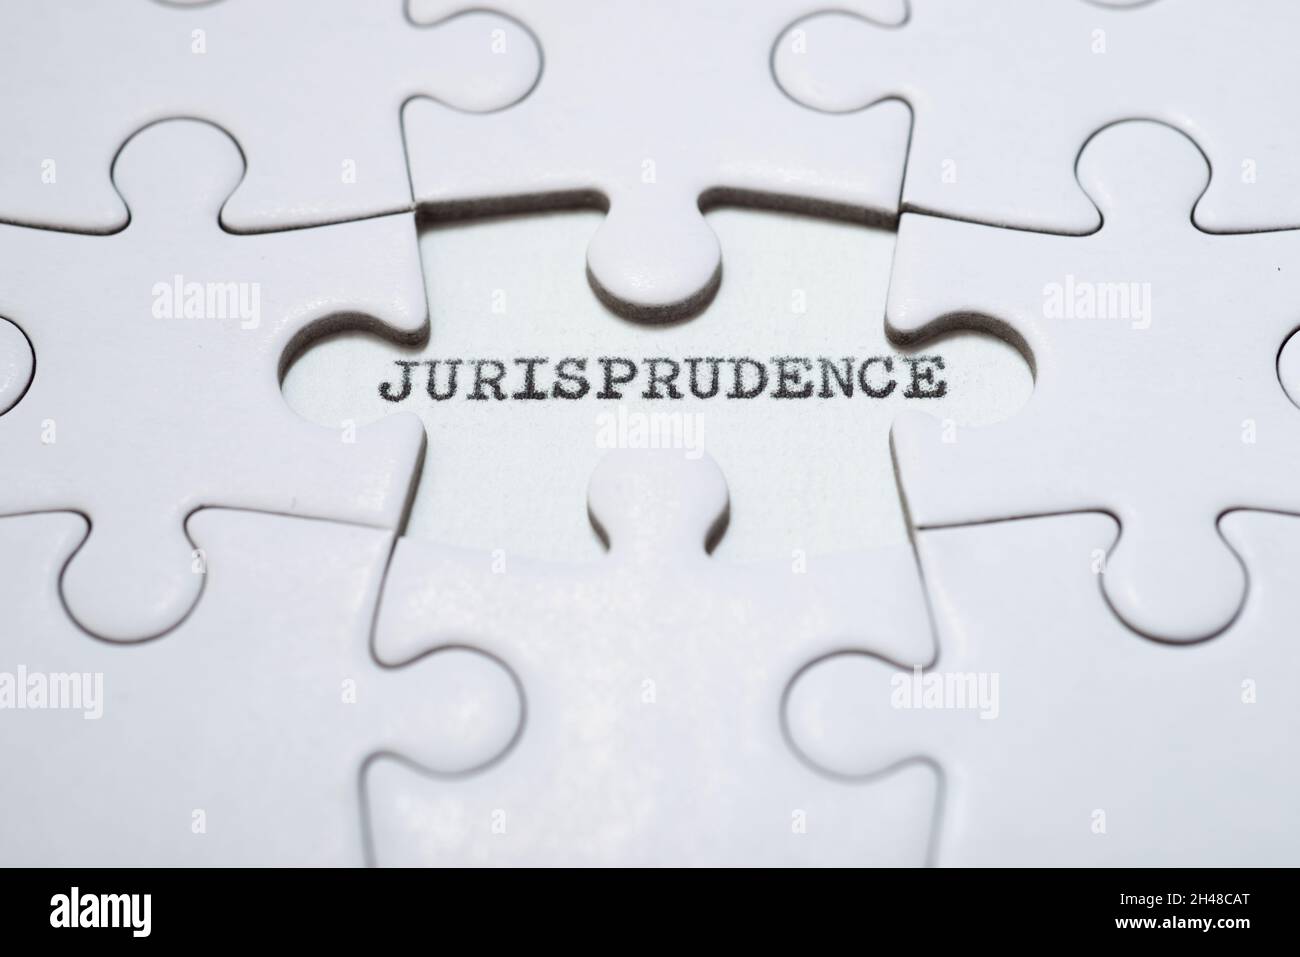 The word jurisprudence written with a typewriter. Stock Photo